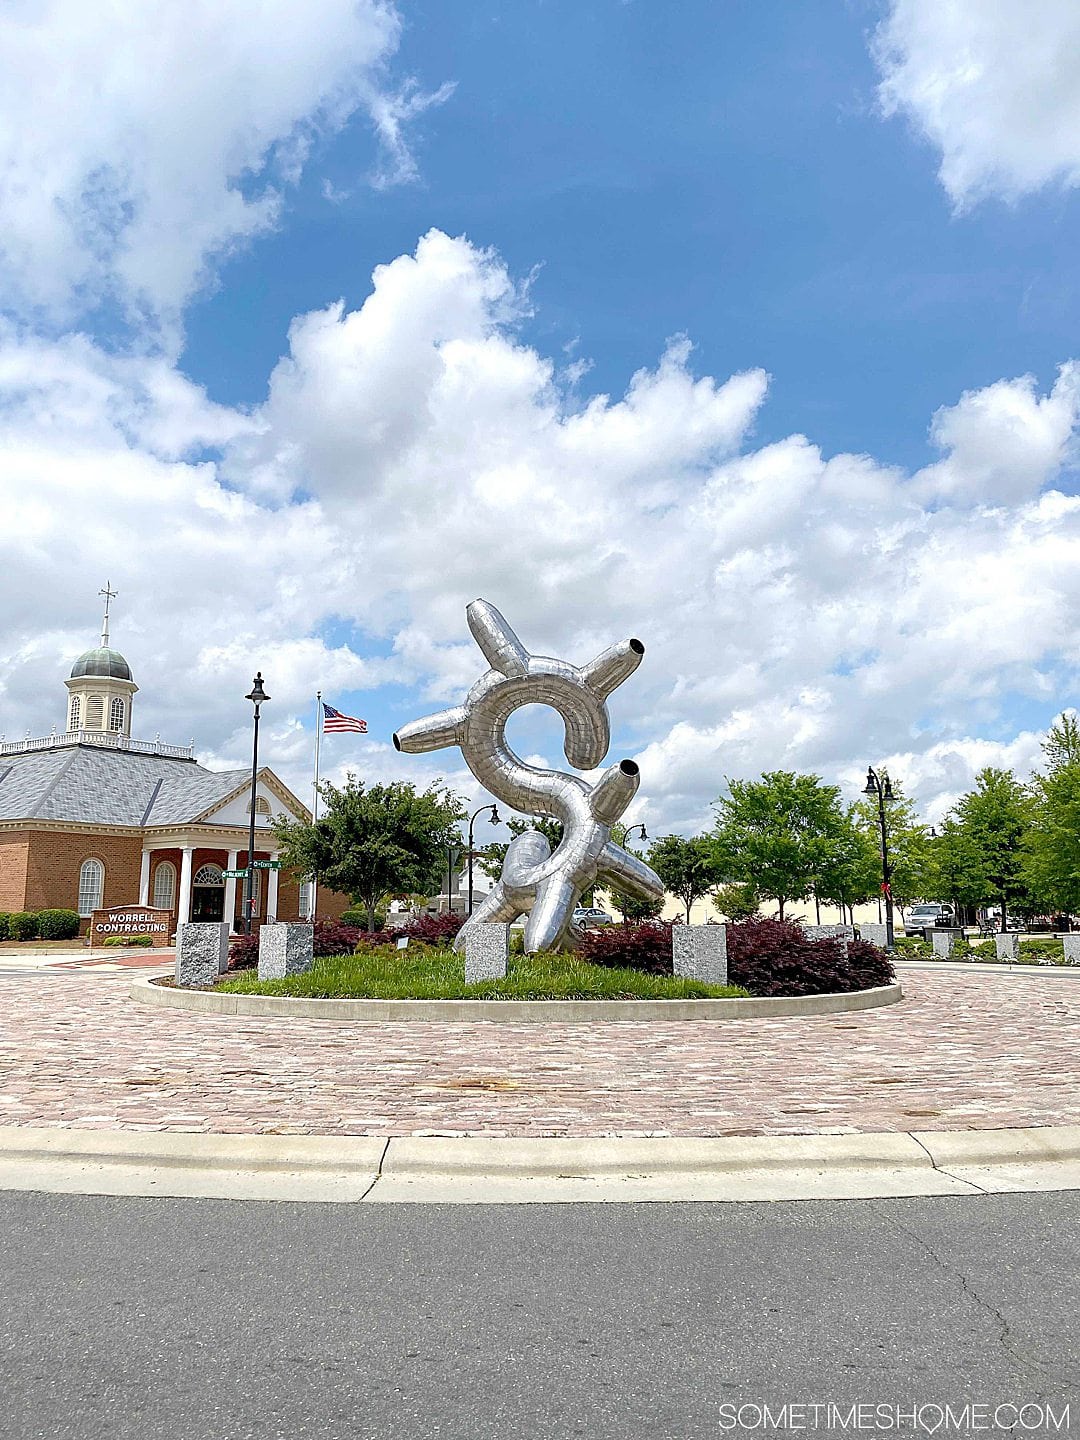 Sculpture on a main street with blue clouds